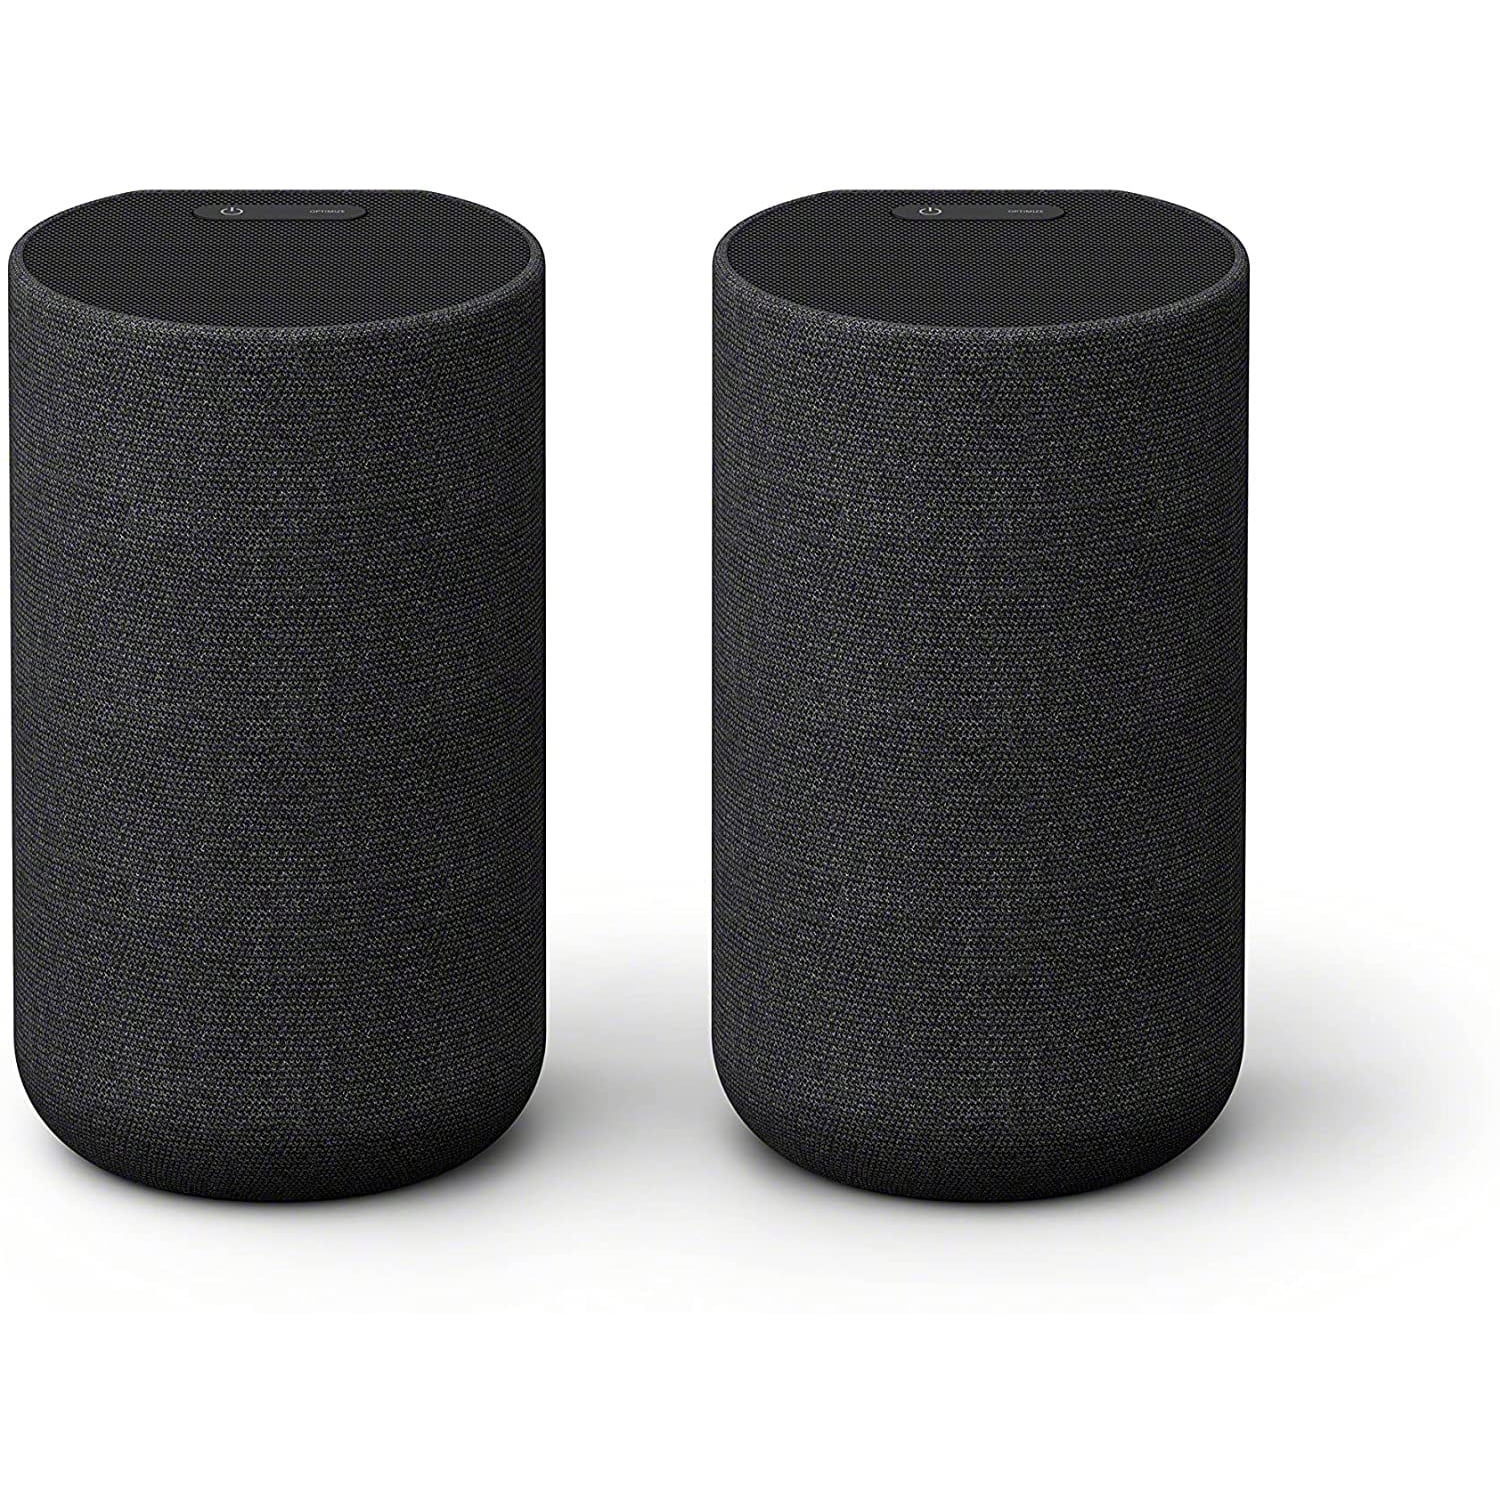 Sony SA-RS5 Wireless Rear Speakers with Built-in Battery for HT